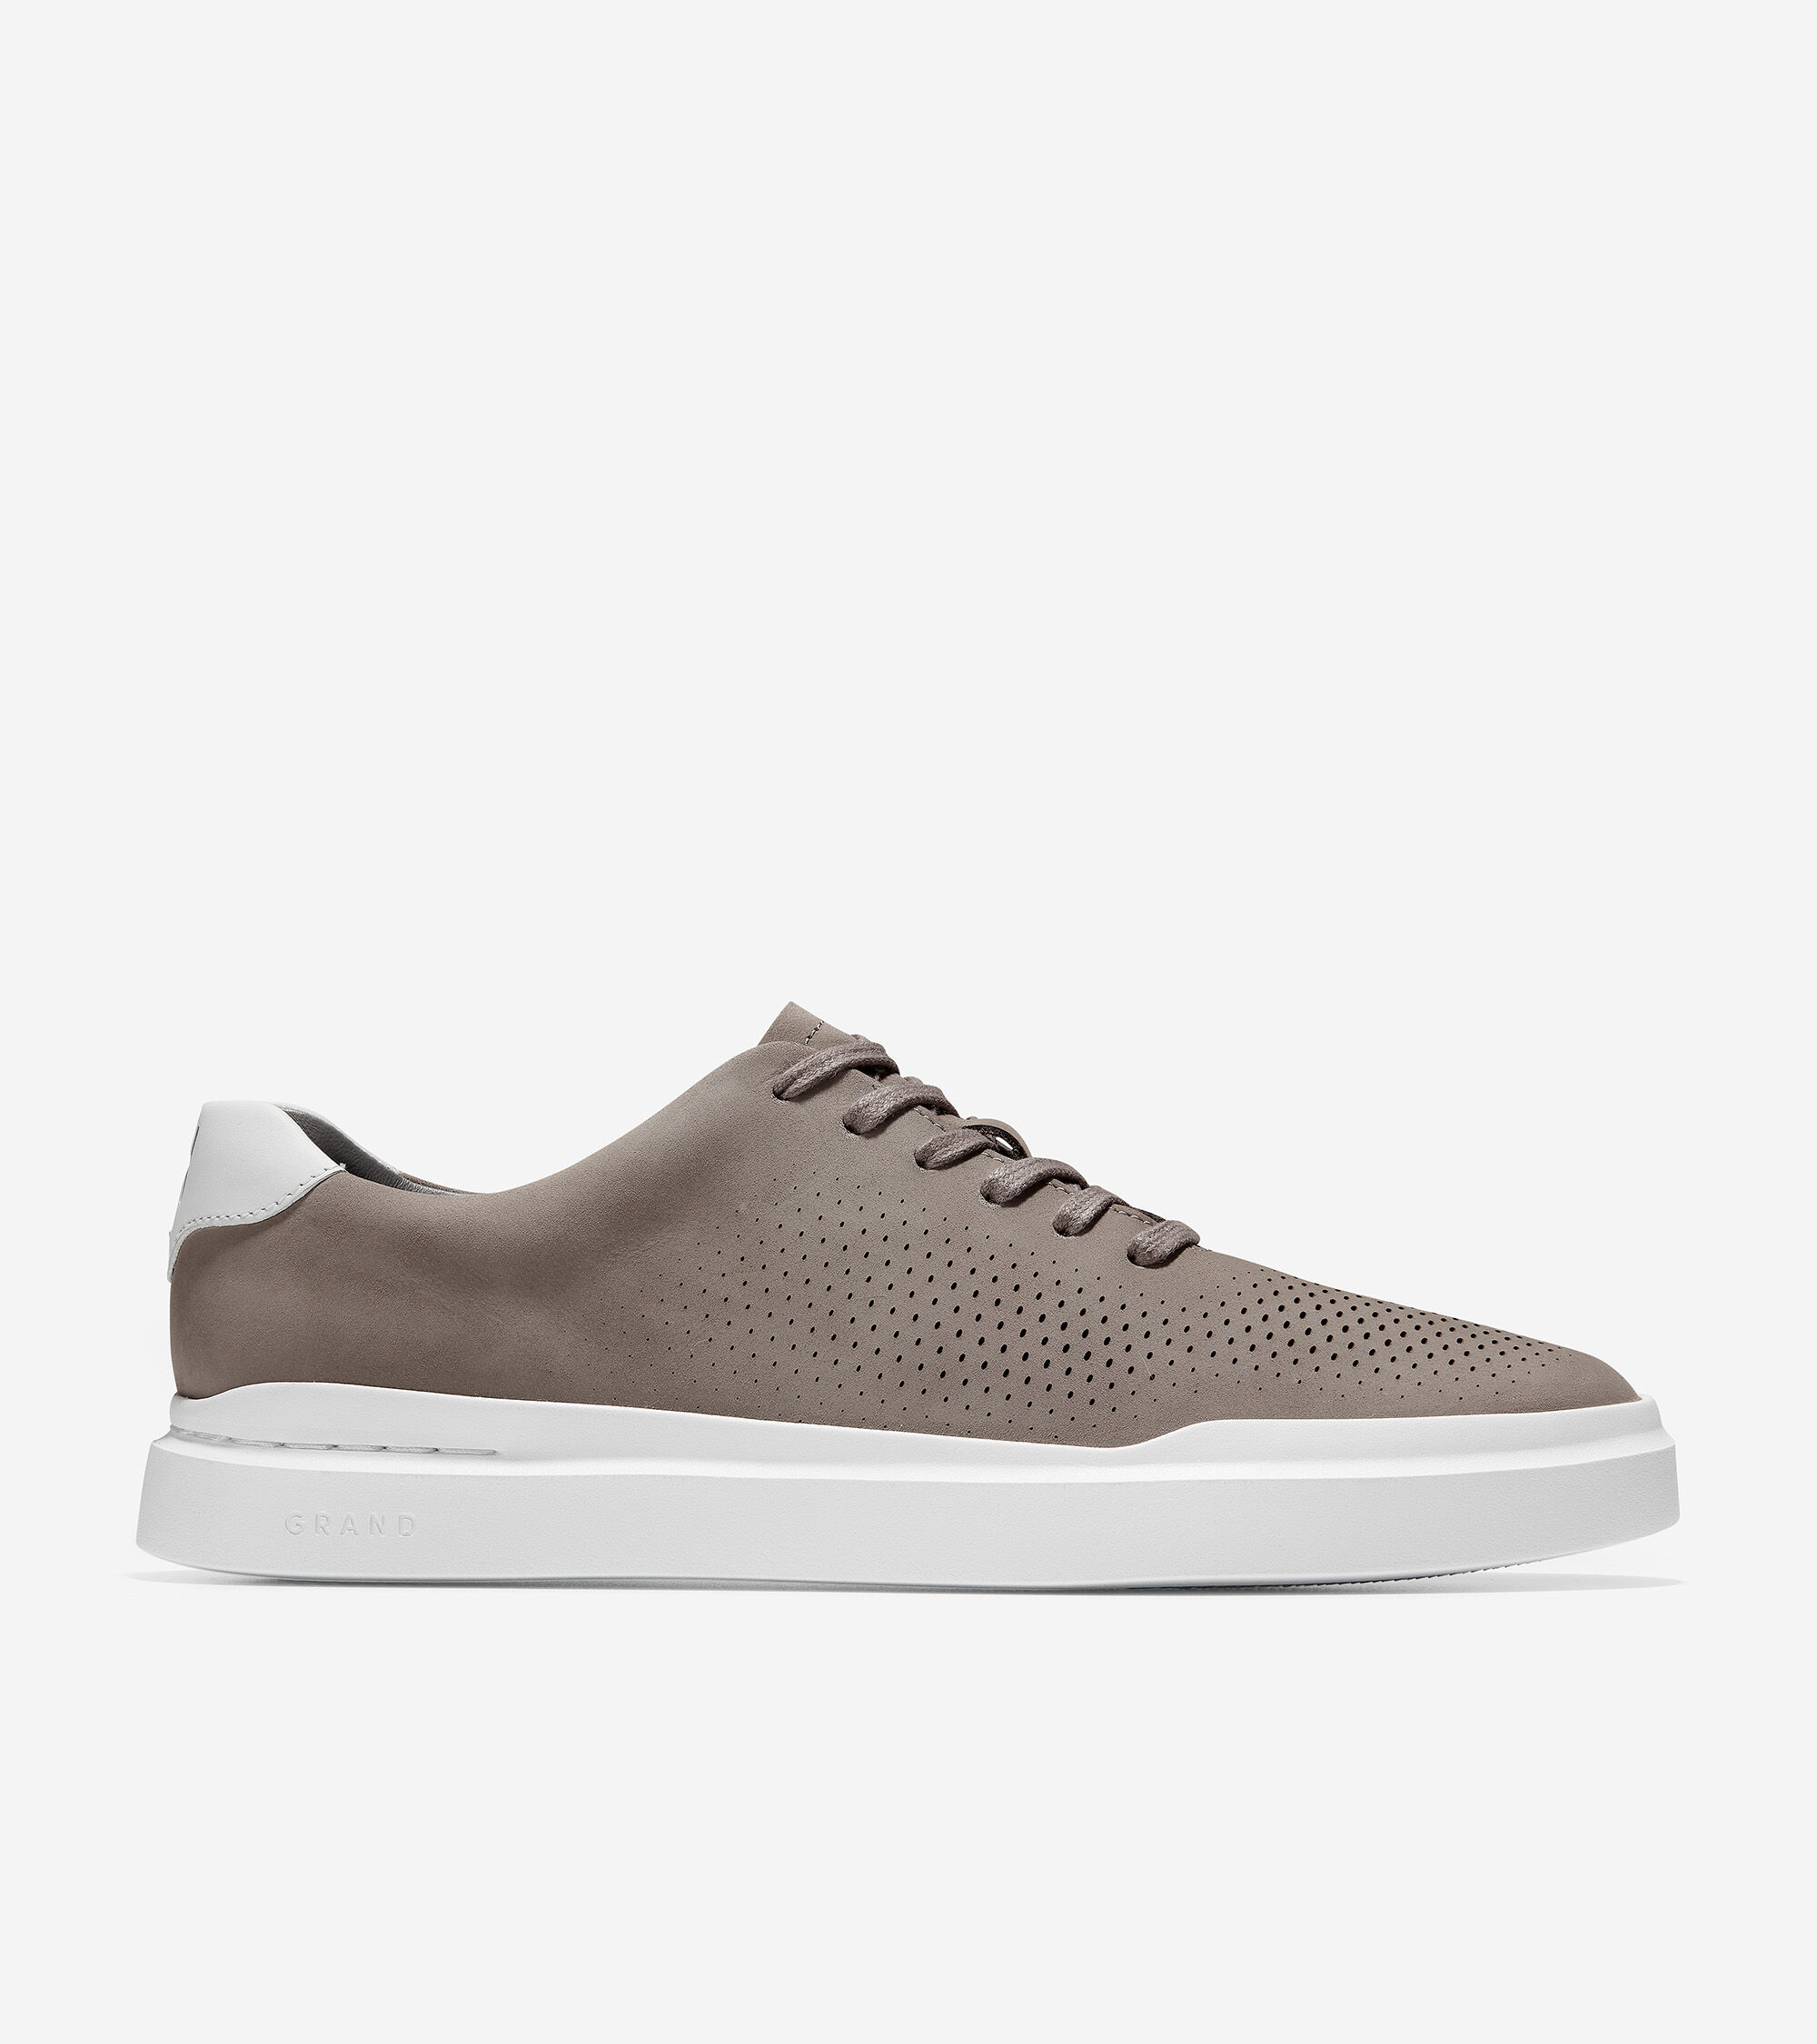 cole and haan mens shoes